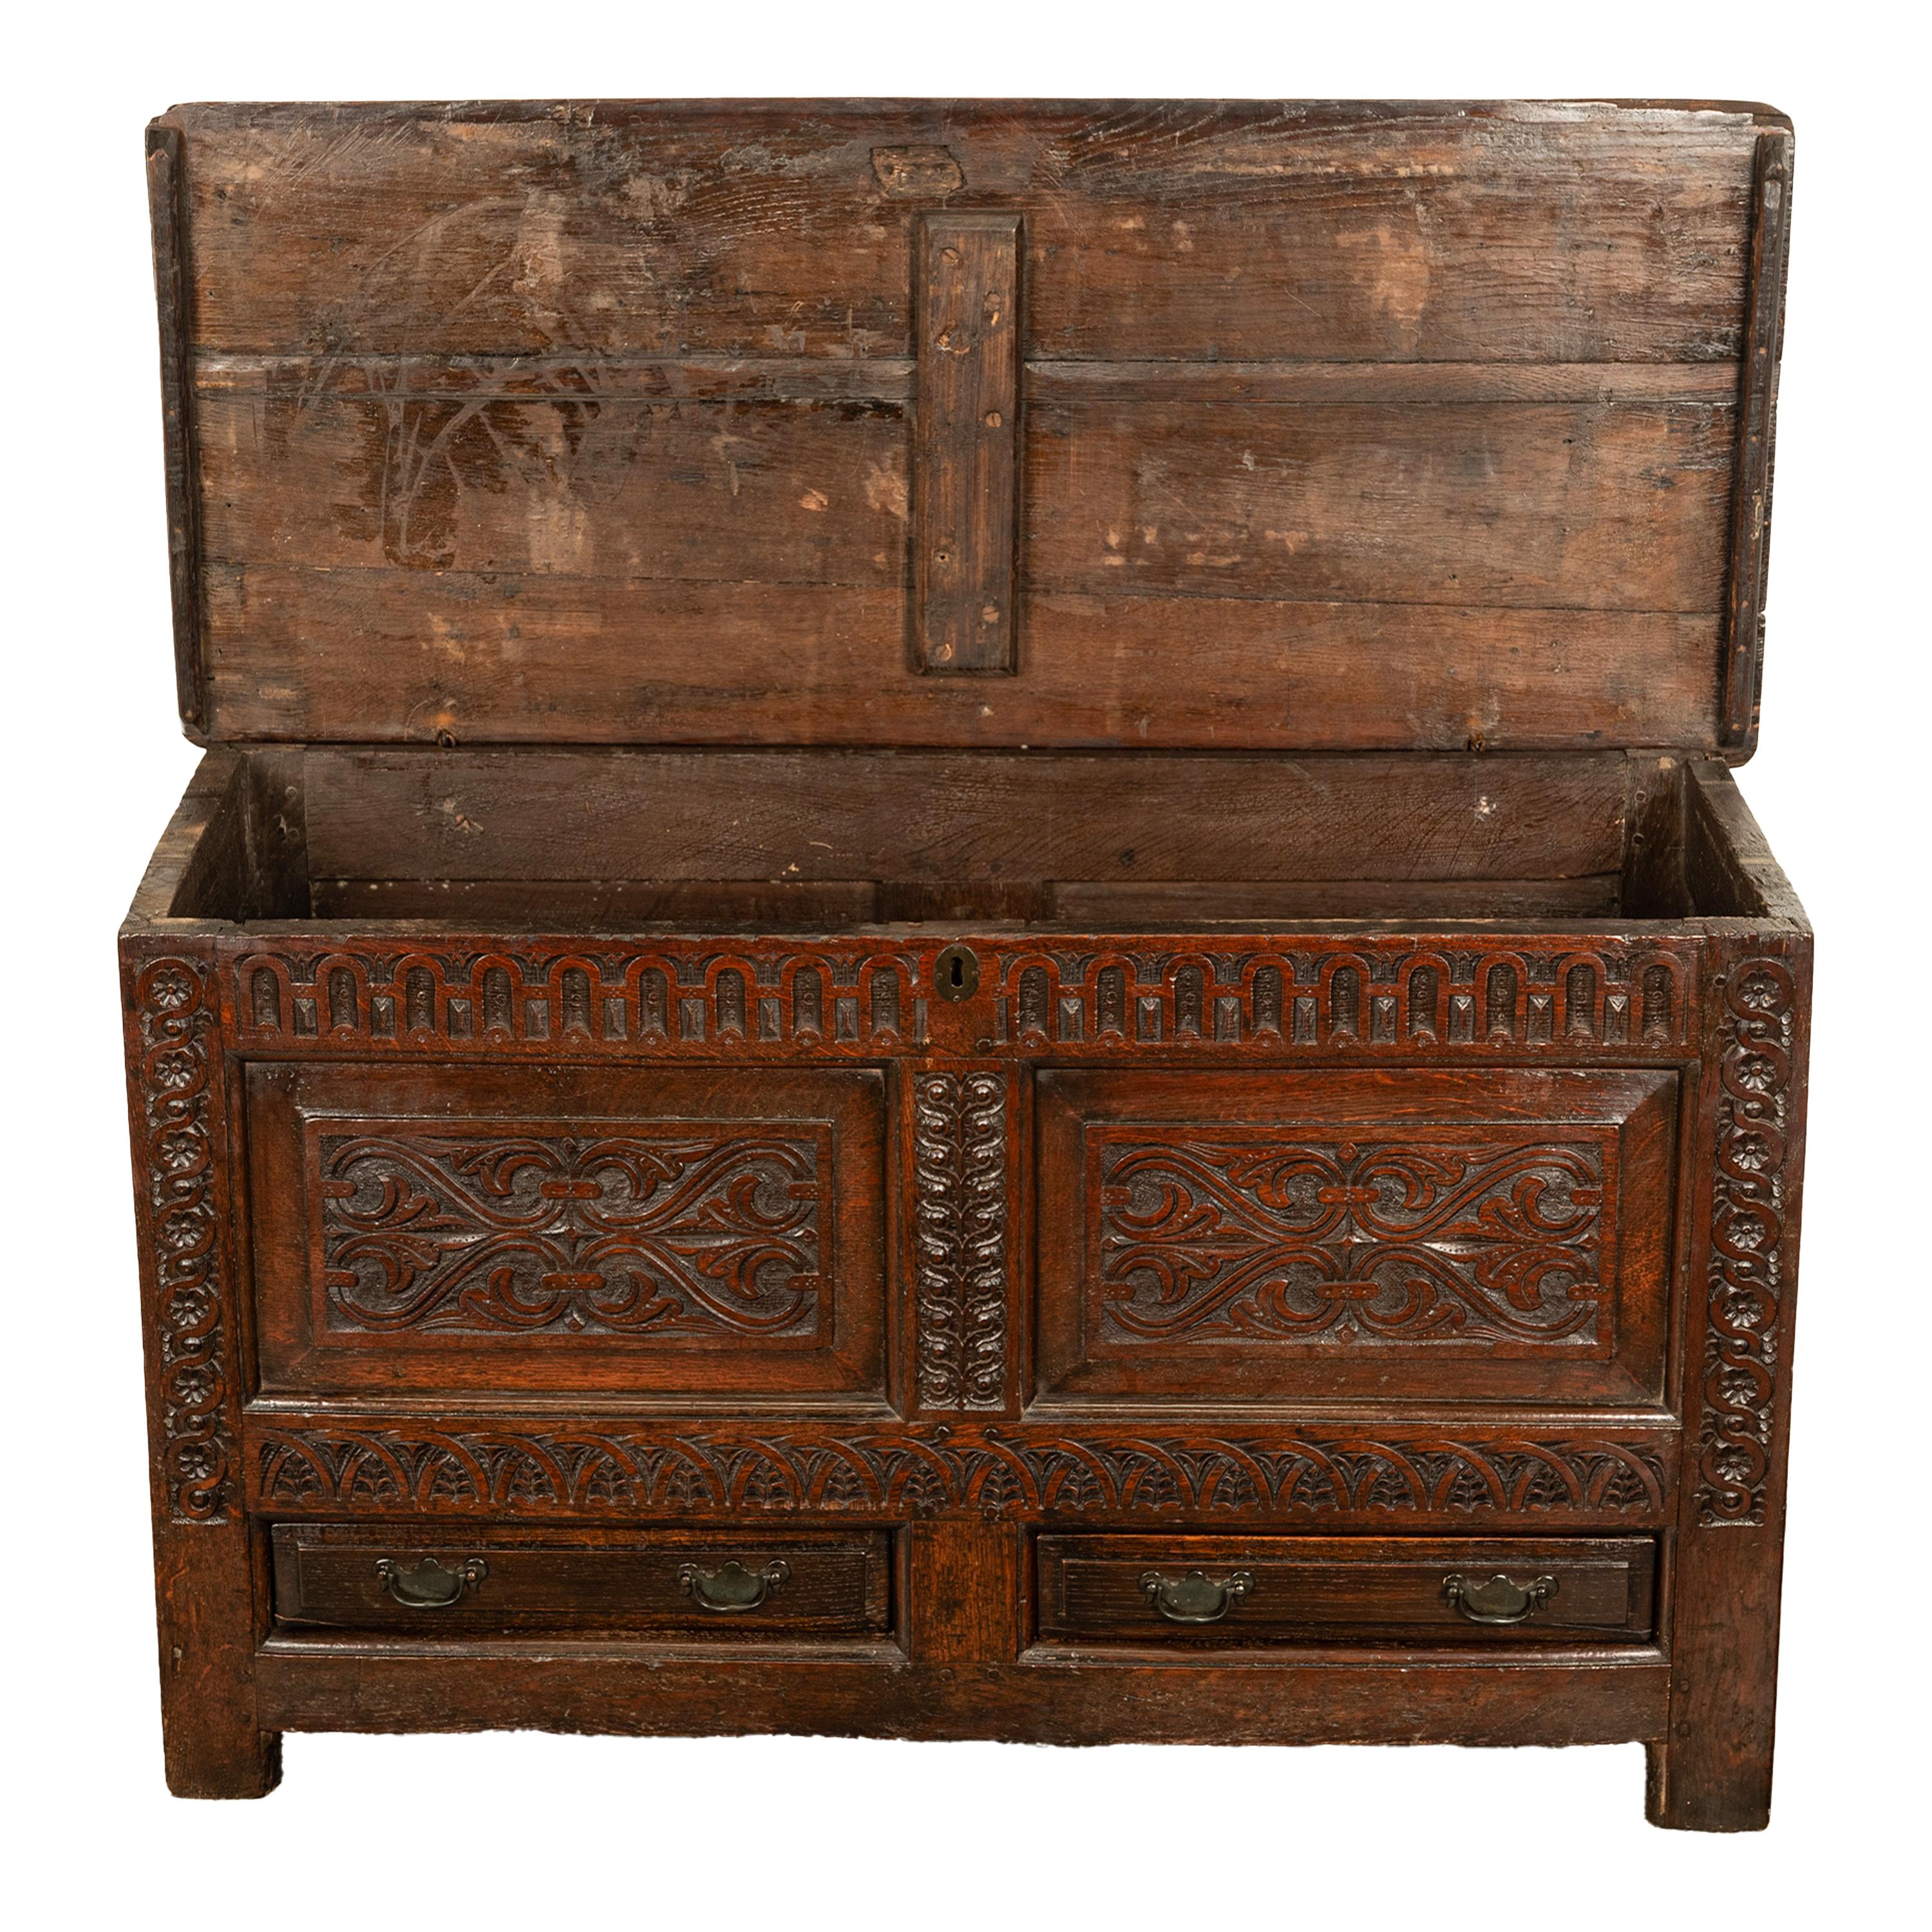  Antique English 17th Century King Charles II Carved Oak Coffer Mule Chest 1680  For Sale 3